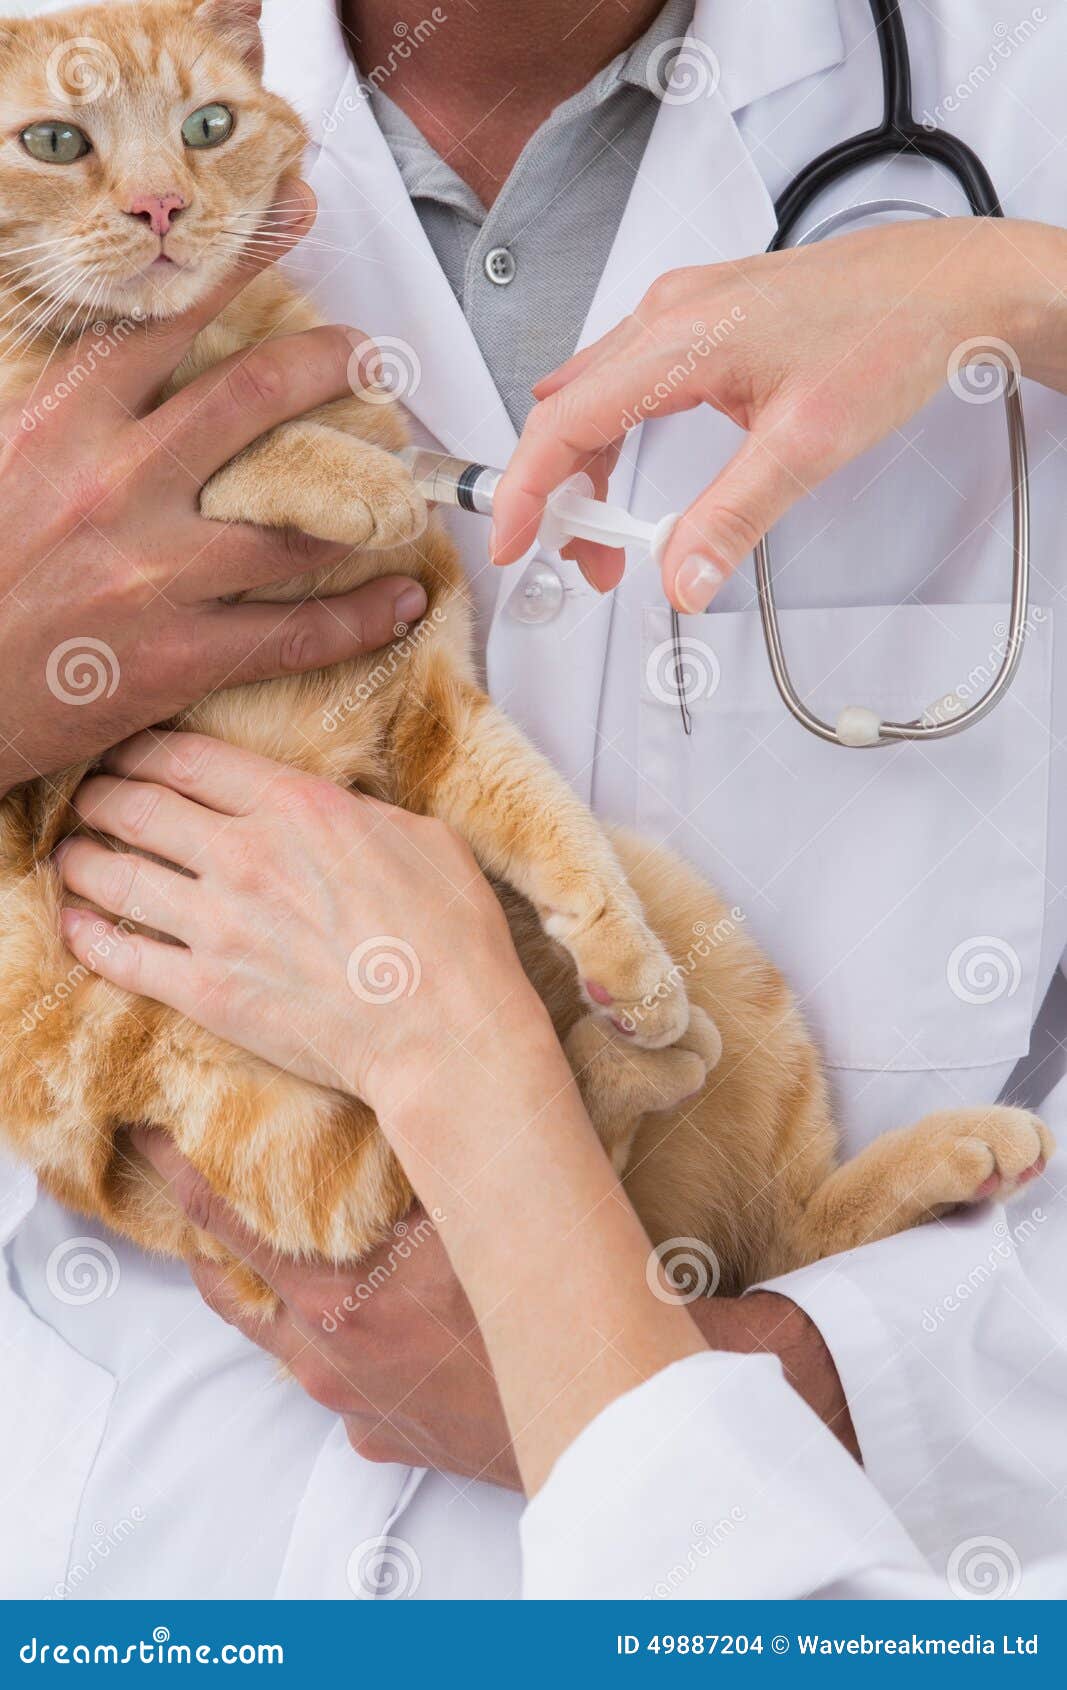 veterinarians doing injection at a cat